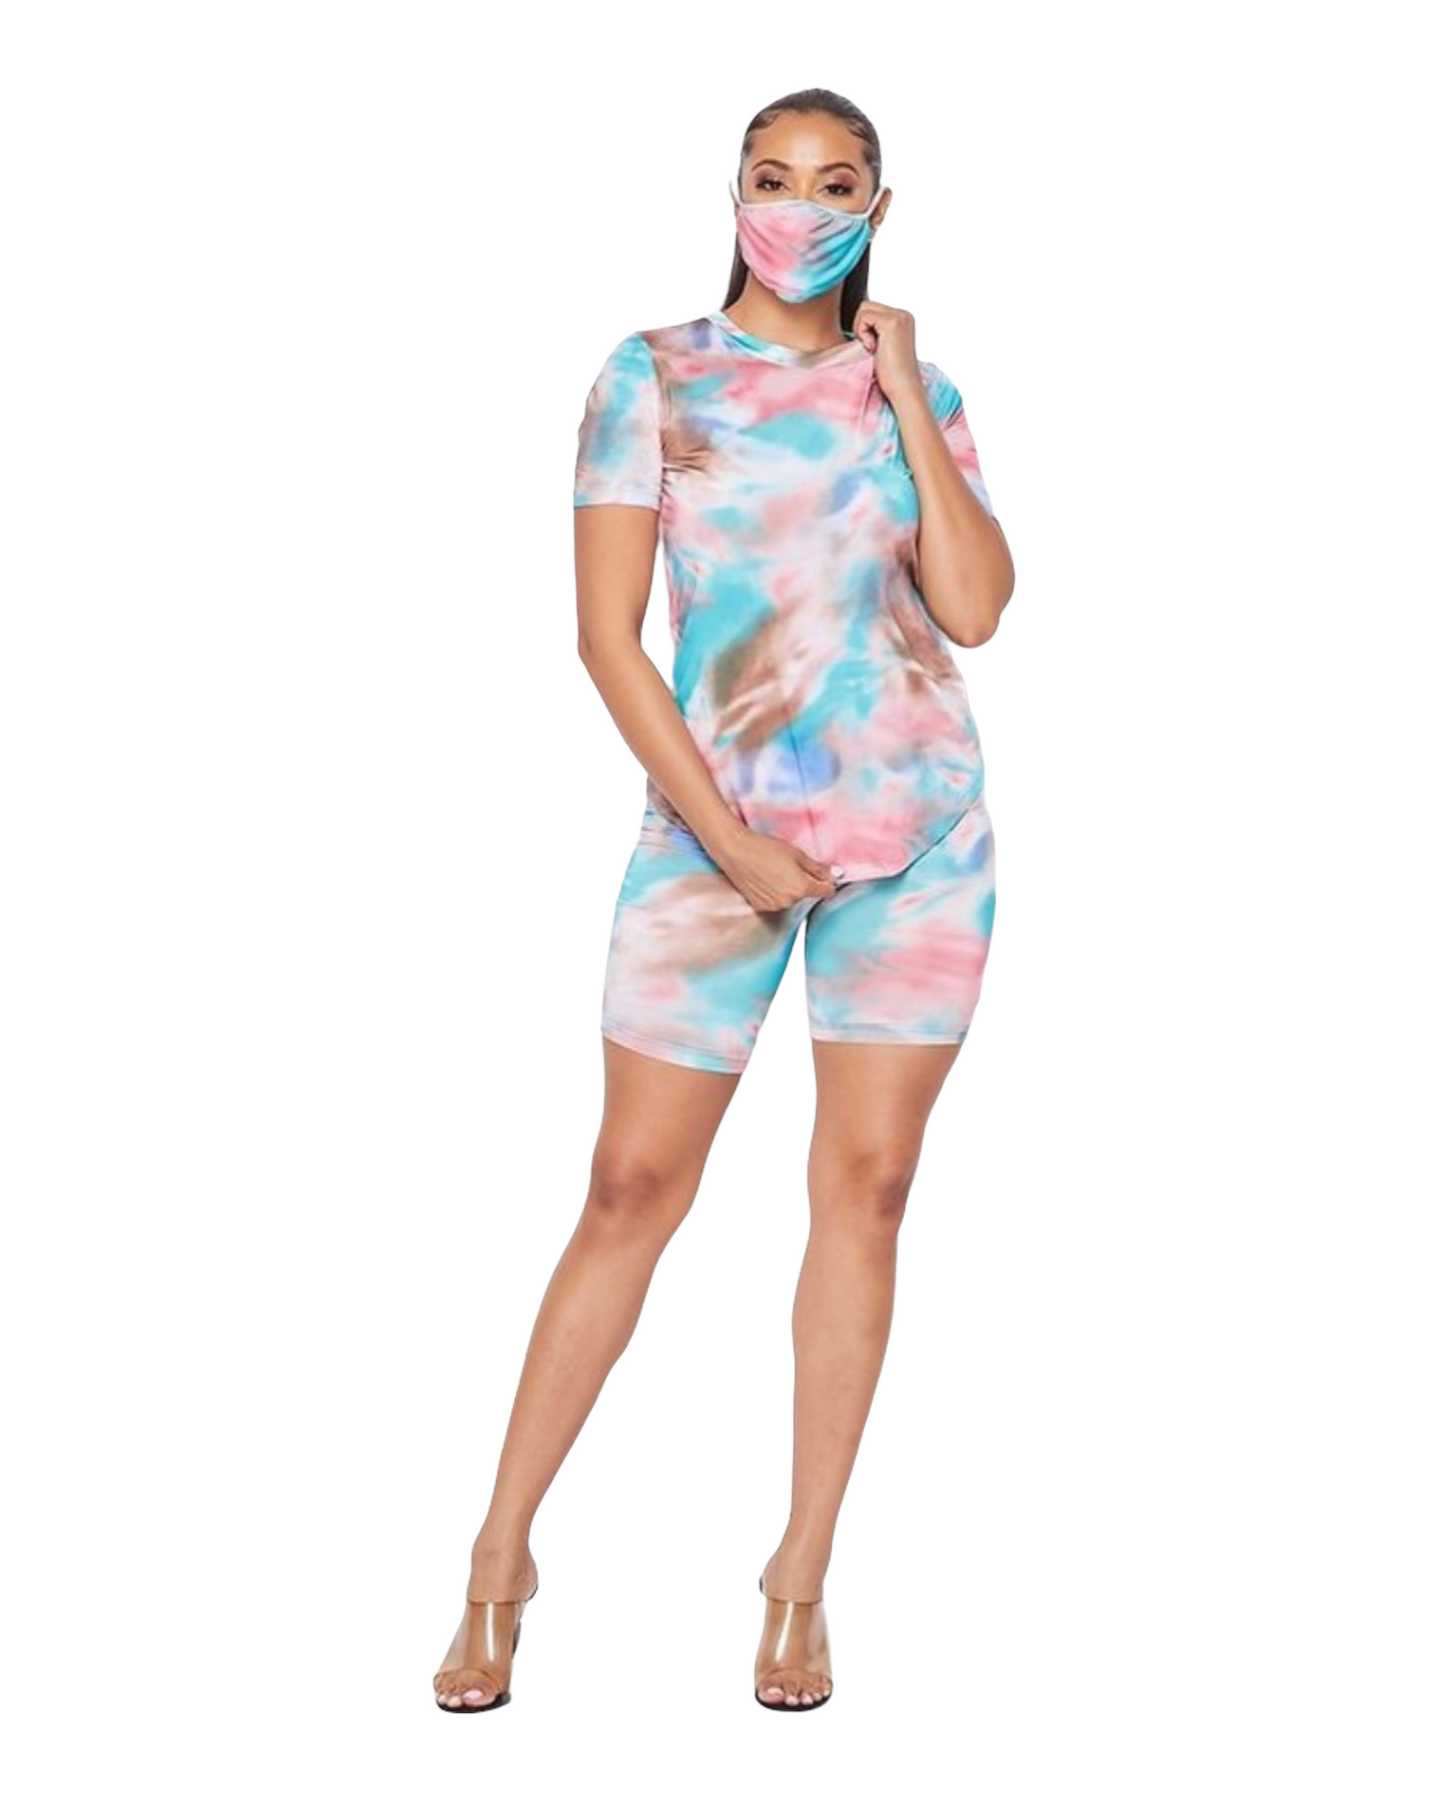 Cutie Biker Outfit With Mask - Regular Size